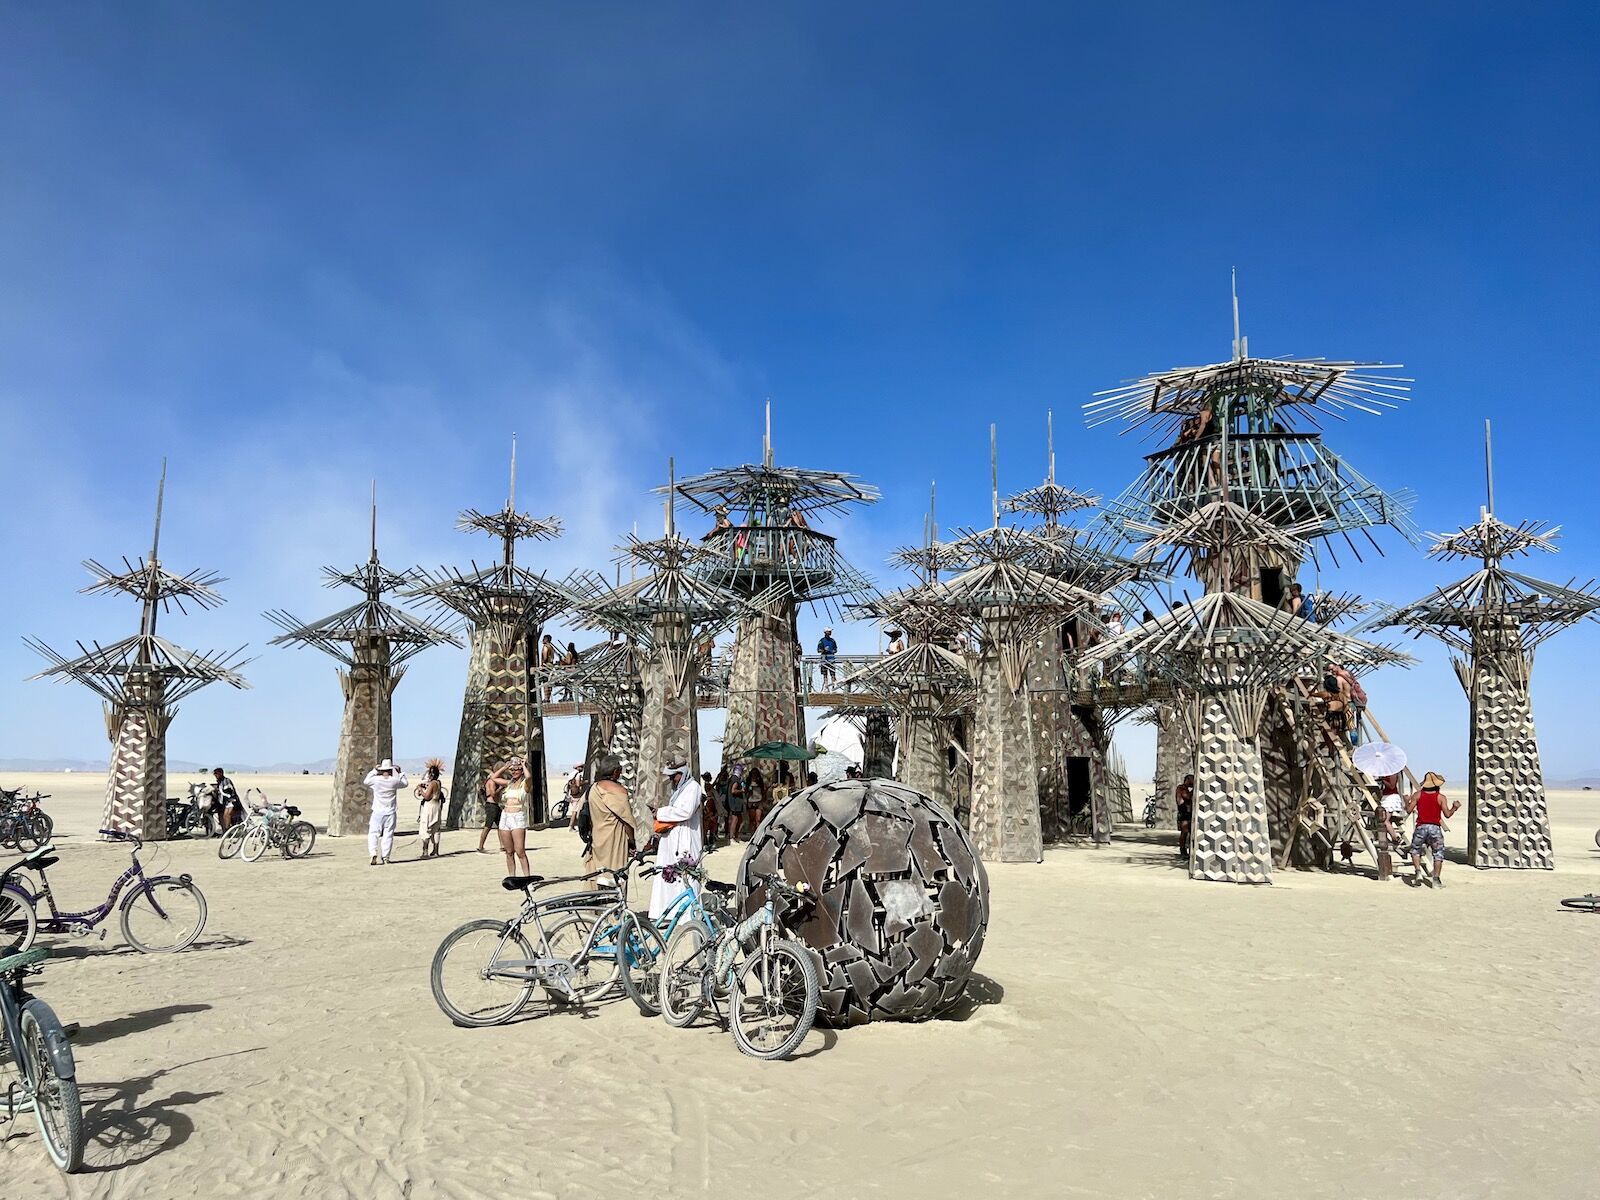 Art from Burning Man 2022: "Paradisium" by Dave Keane & Folly Builders